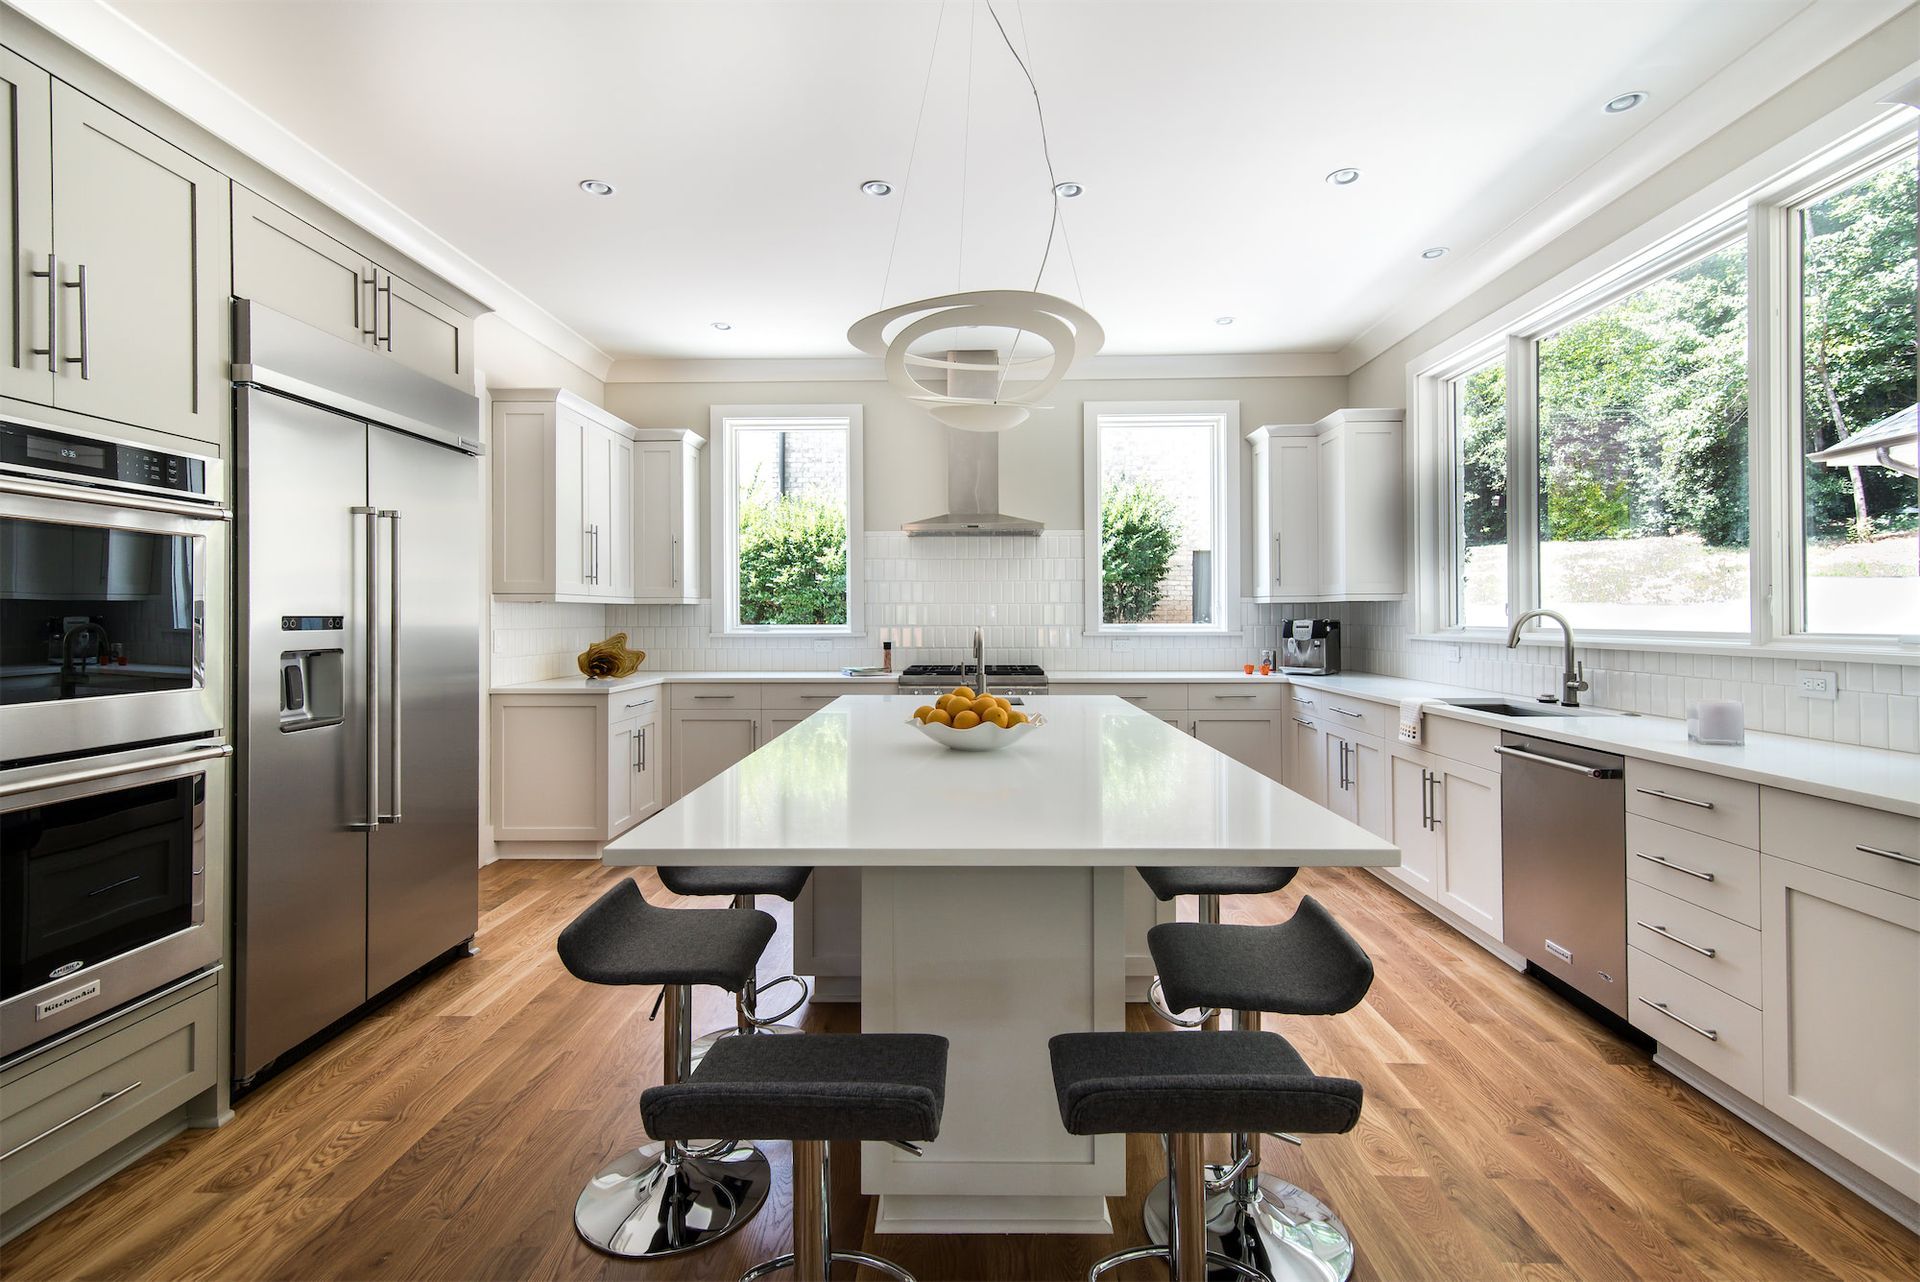 a kitchen with stainless steel appliances and a large island in the middle .